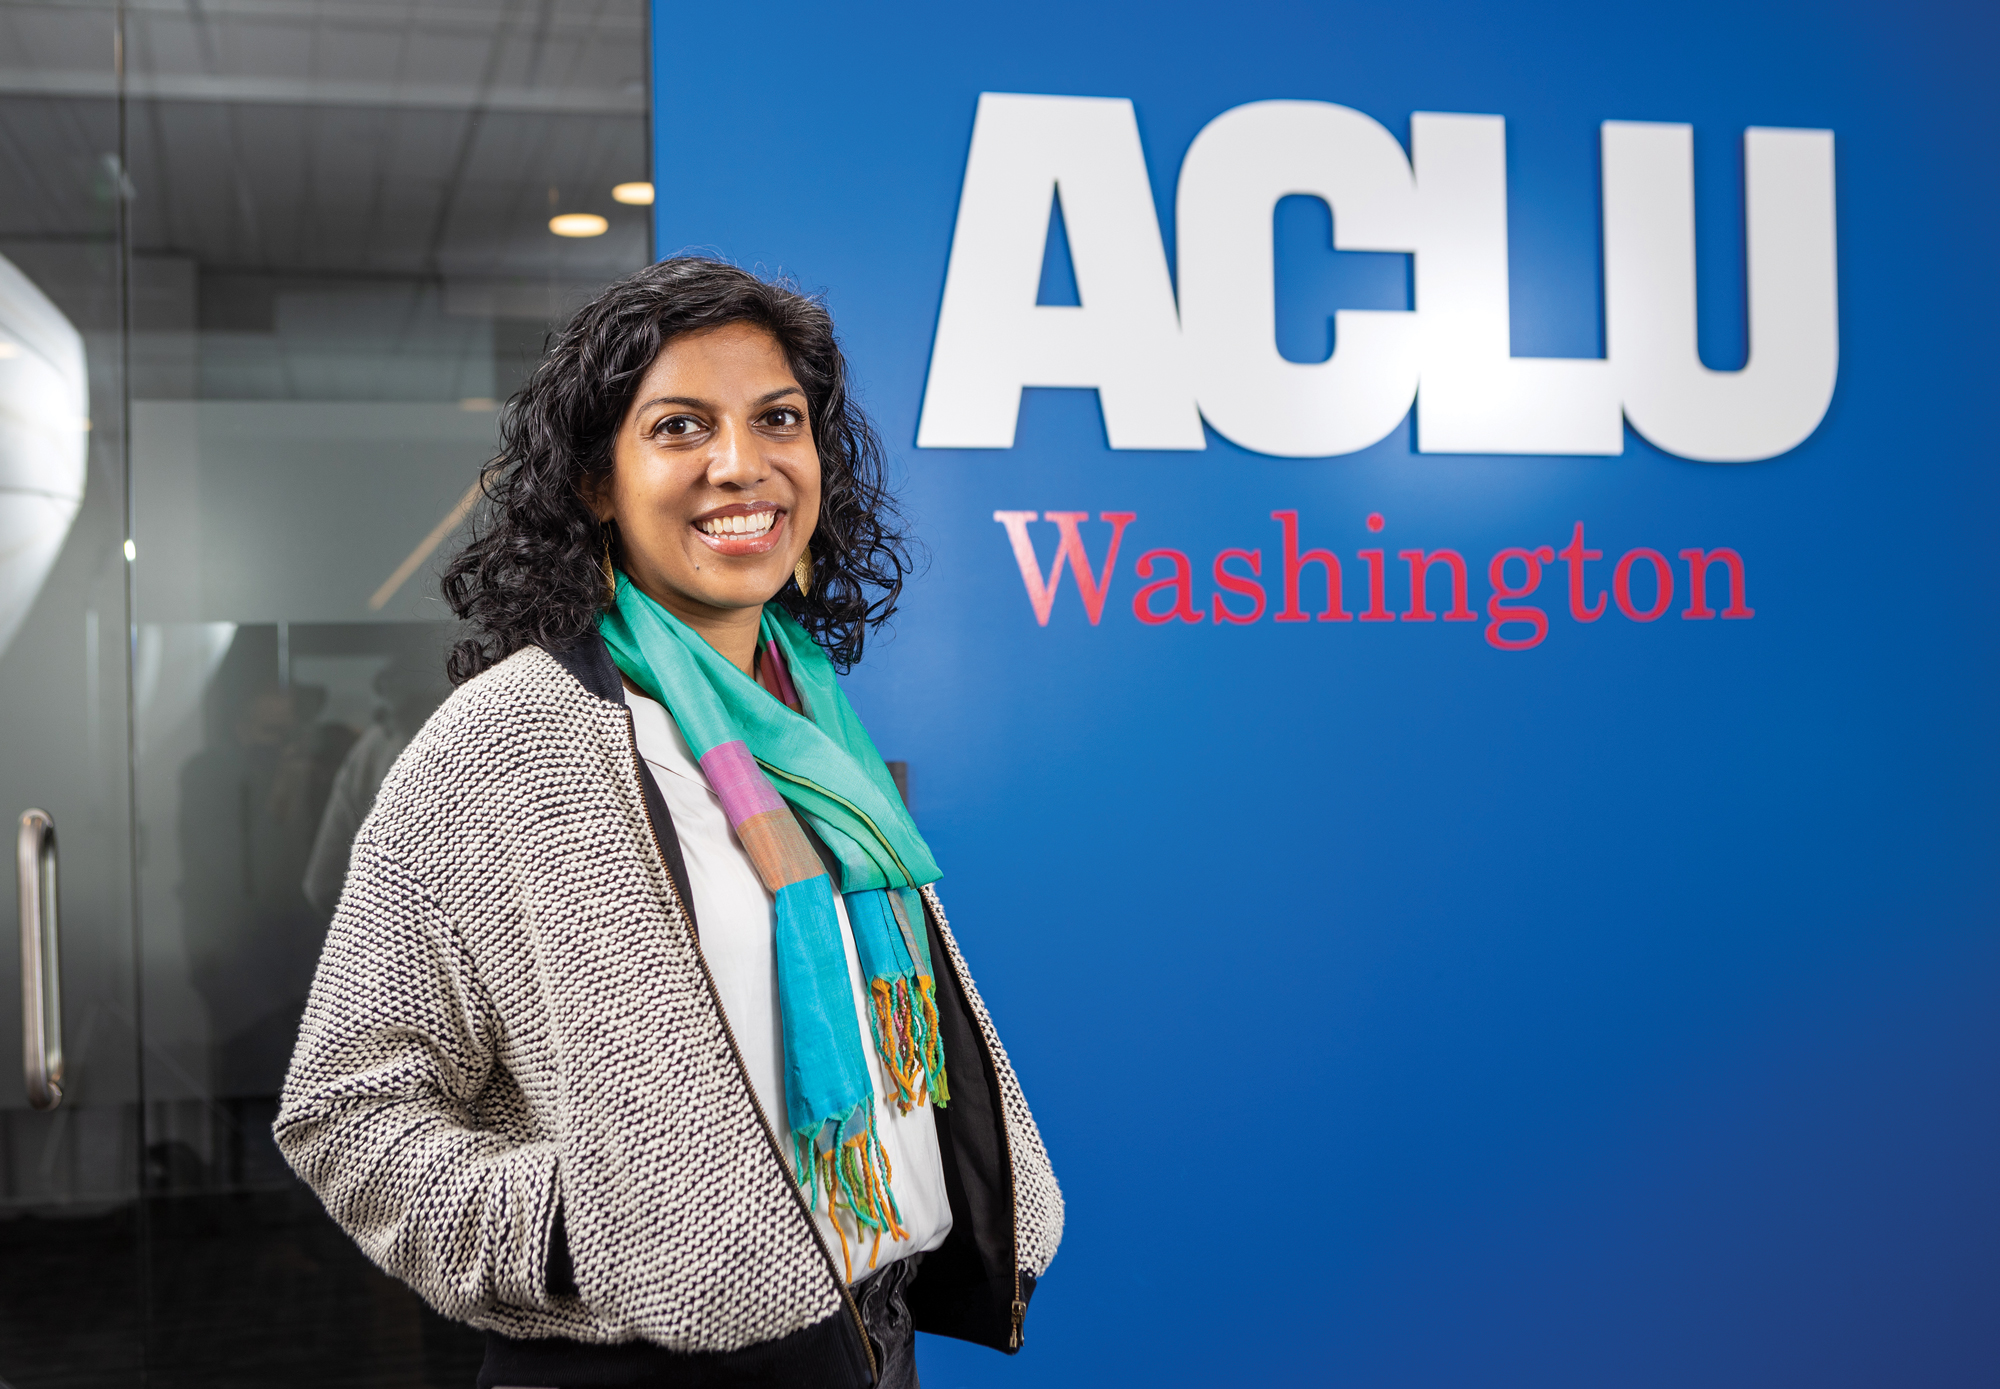 A woman in formal attire stands smiling in front of a sign for ACLU Washington